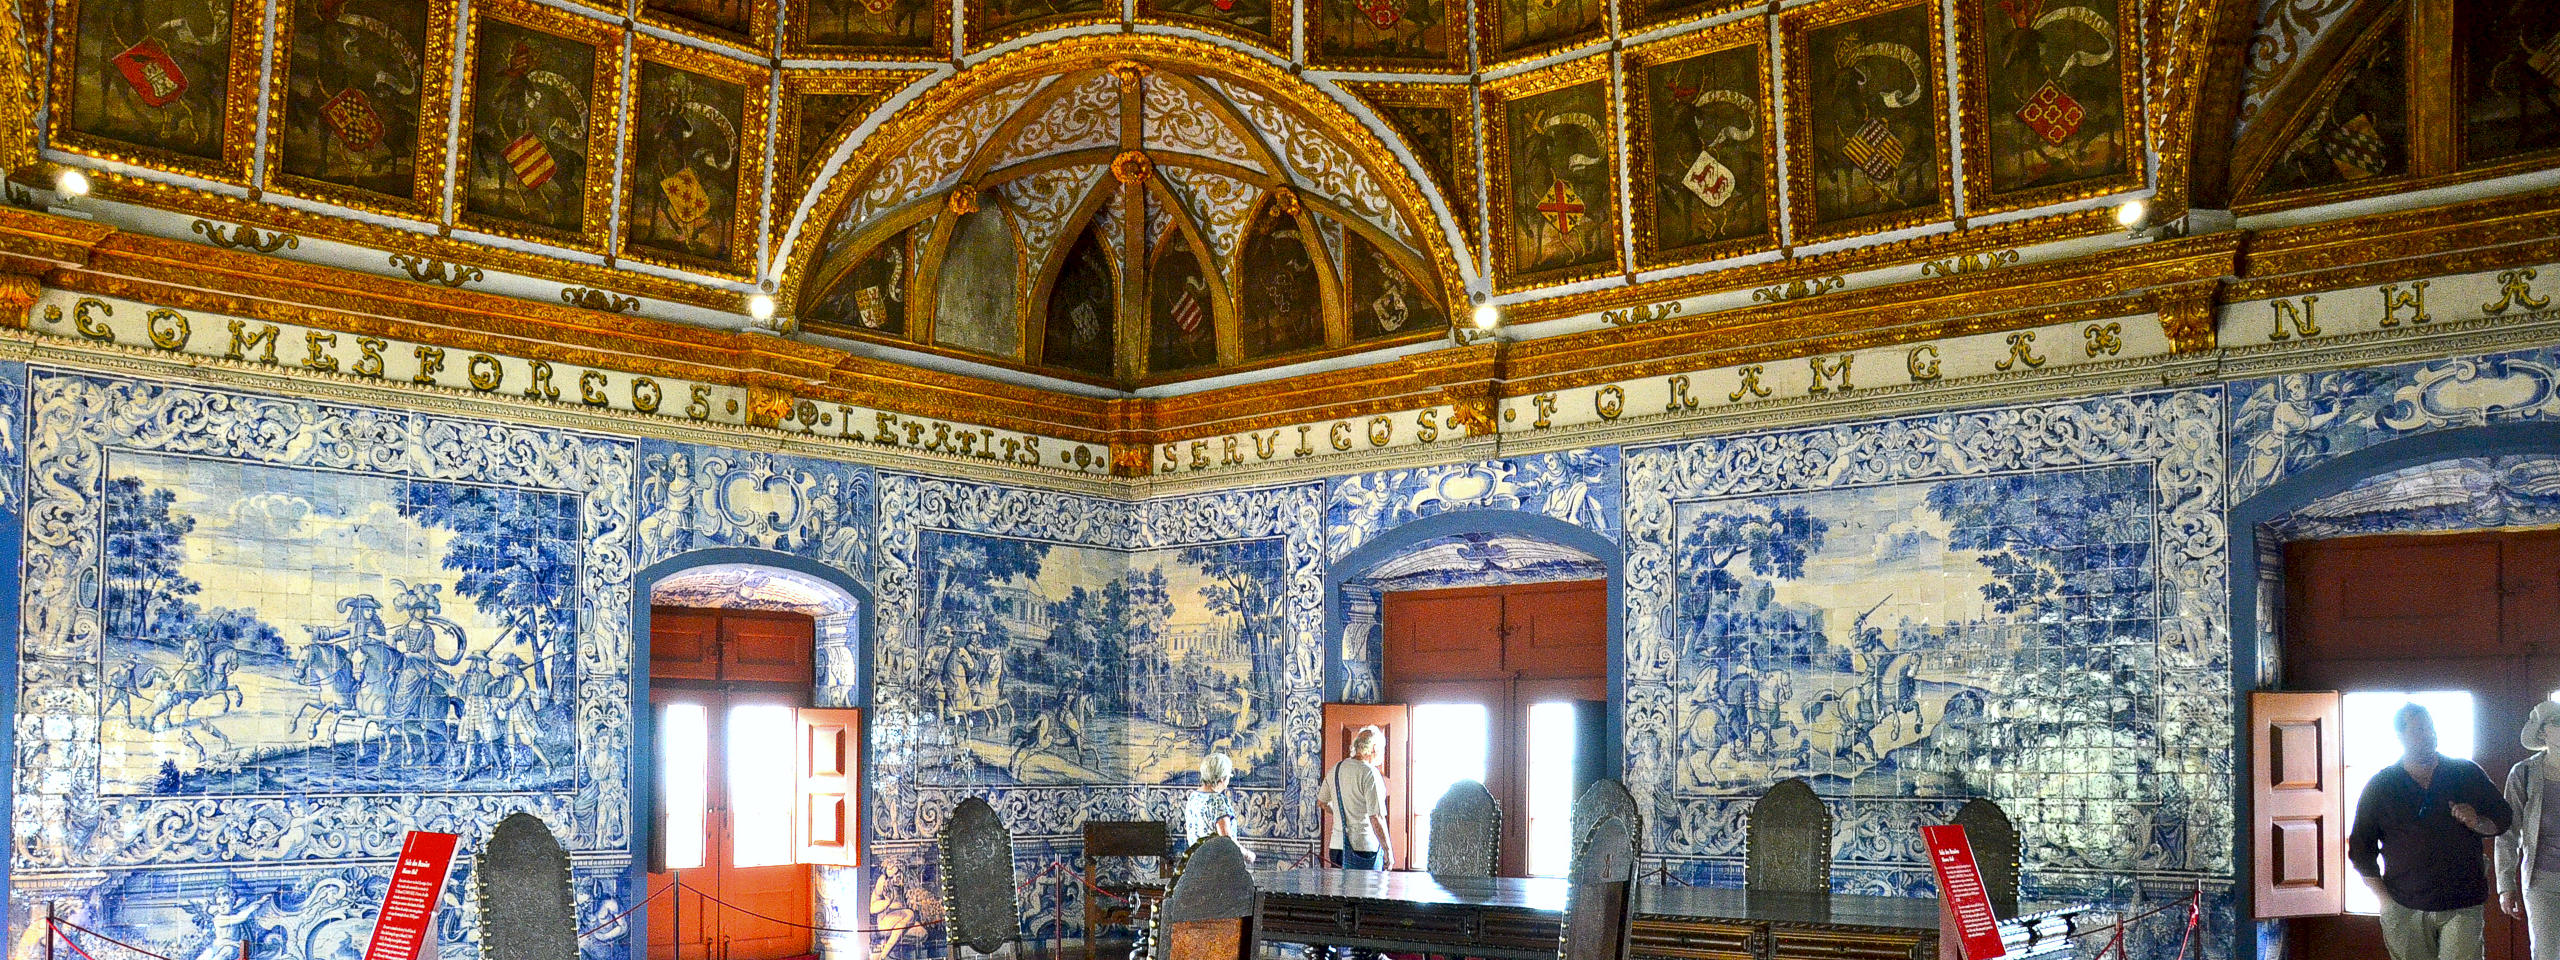 Coat of Arms Room in the Sintra National Palace